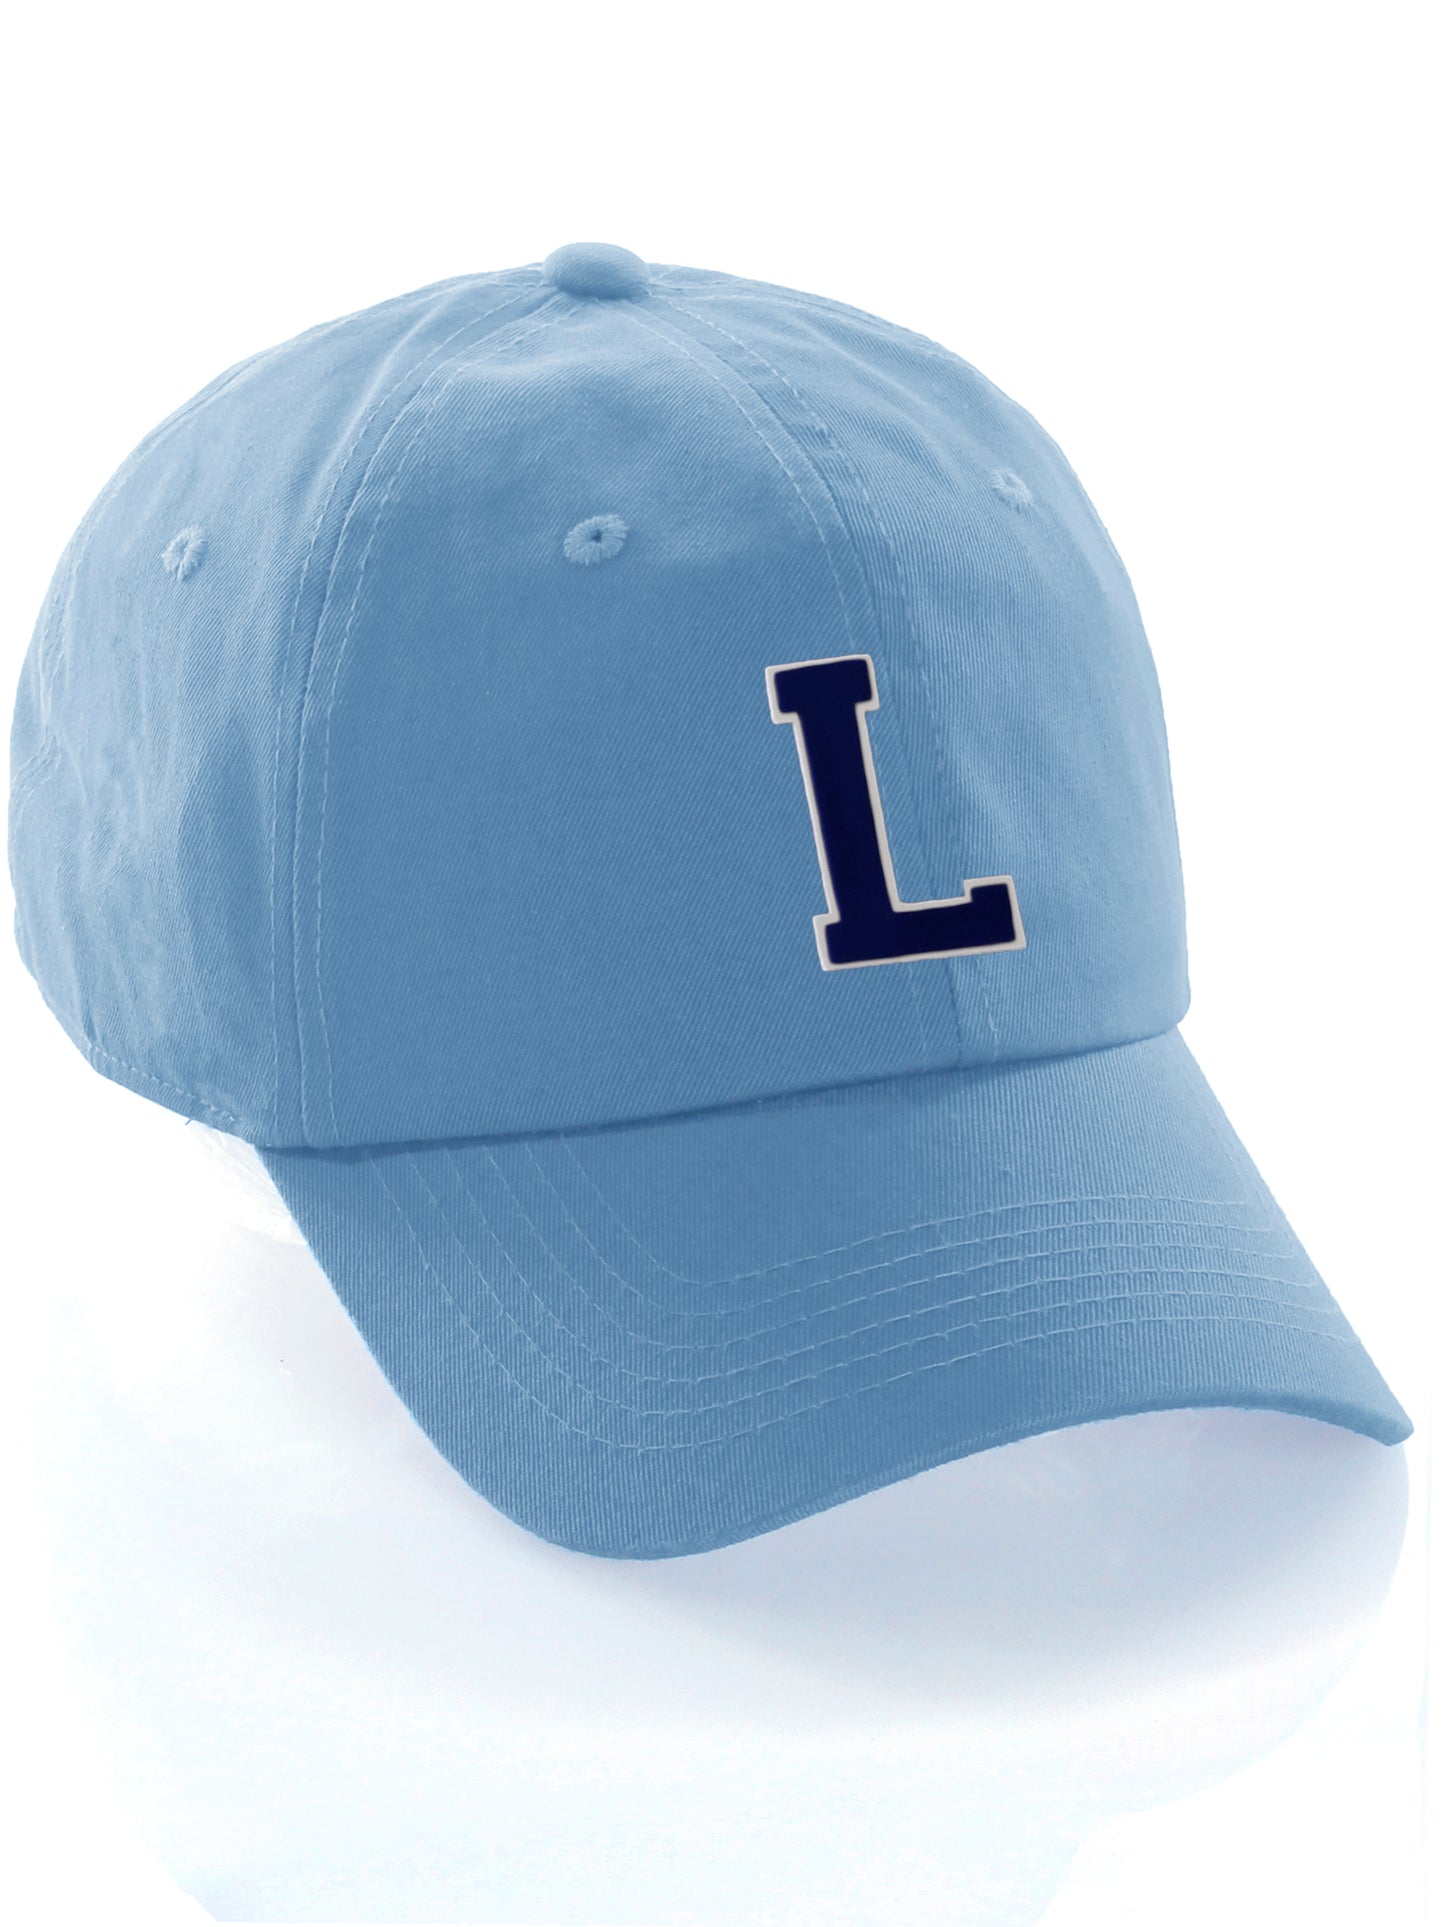 Customized Letter Initial Baseball Hat A to Z Team Colors, Sky Cap White Navy